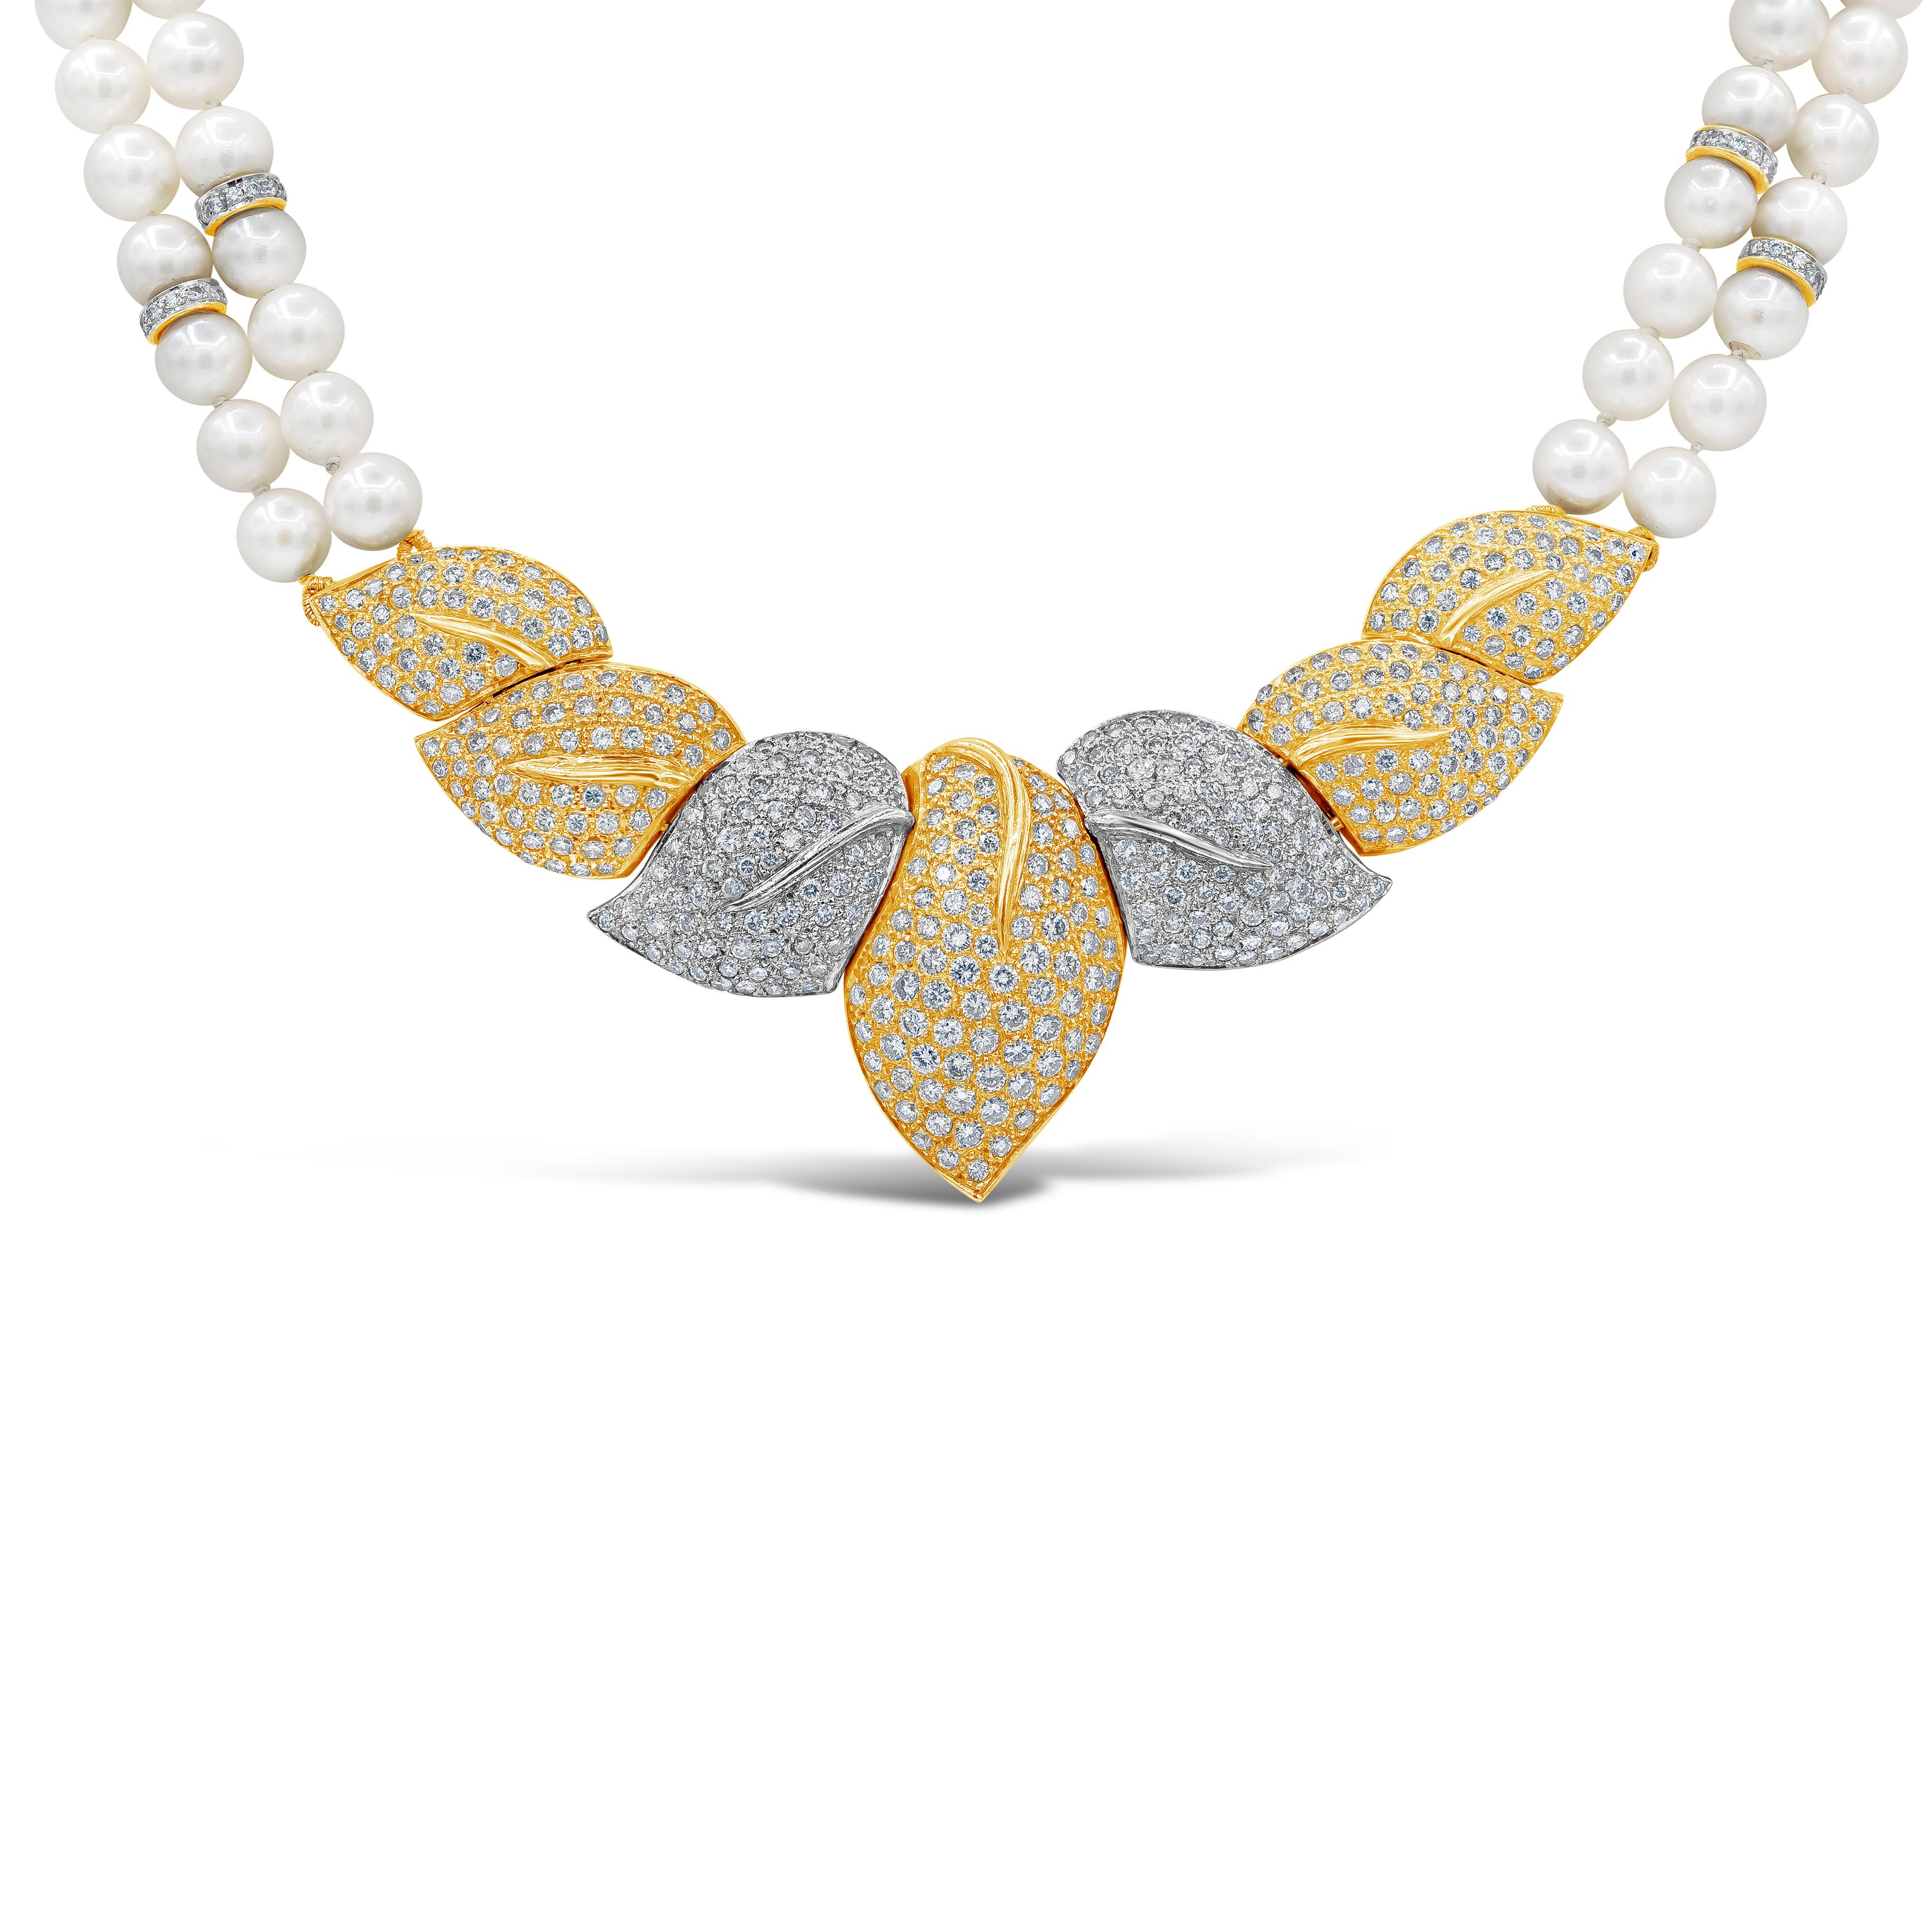 Showcasing intricately-designed leaves encrusted with diamonds, suspended on two strands of 6.10-6.50 millimeter pearls. Diamonds weigh 14.30 carats total. Made in 18 karat gold.

Roman Malakov is a custom house, specializing in creating anything